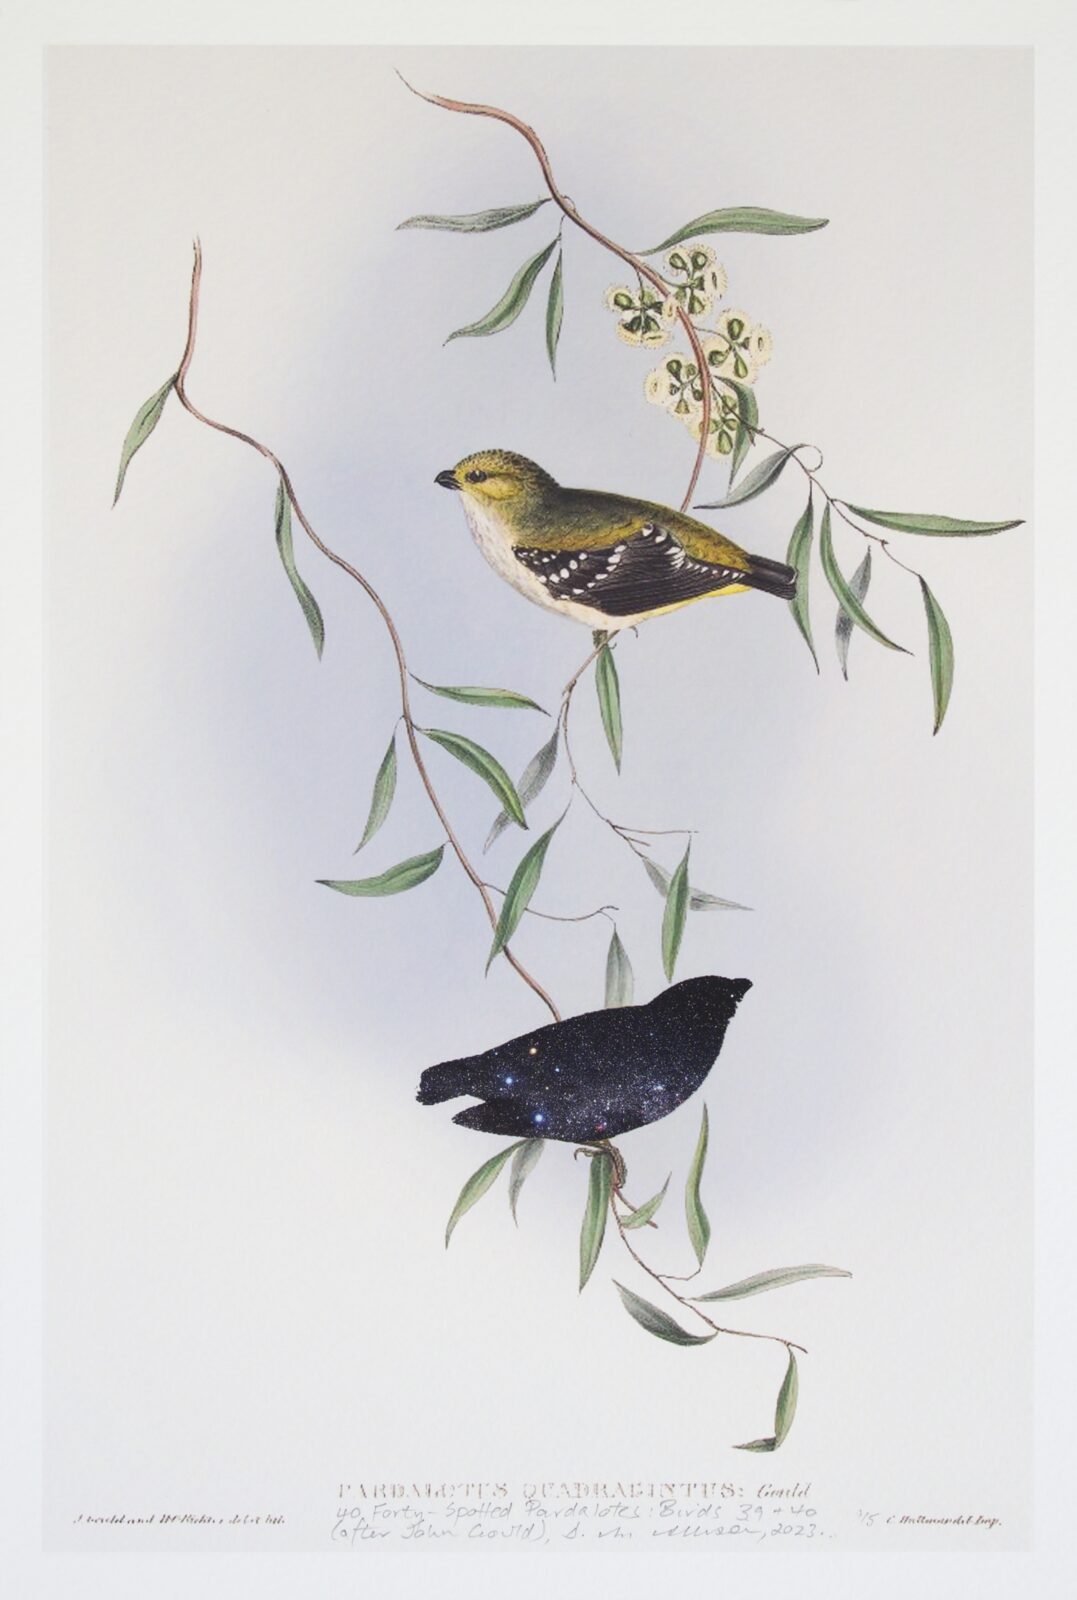 40 Forty-Spotted Pardalotes Birds 39 & 40 (after John Gould)